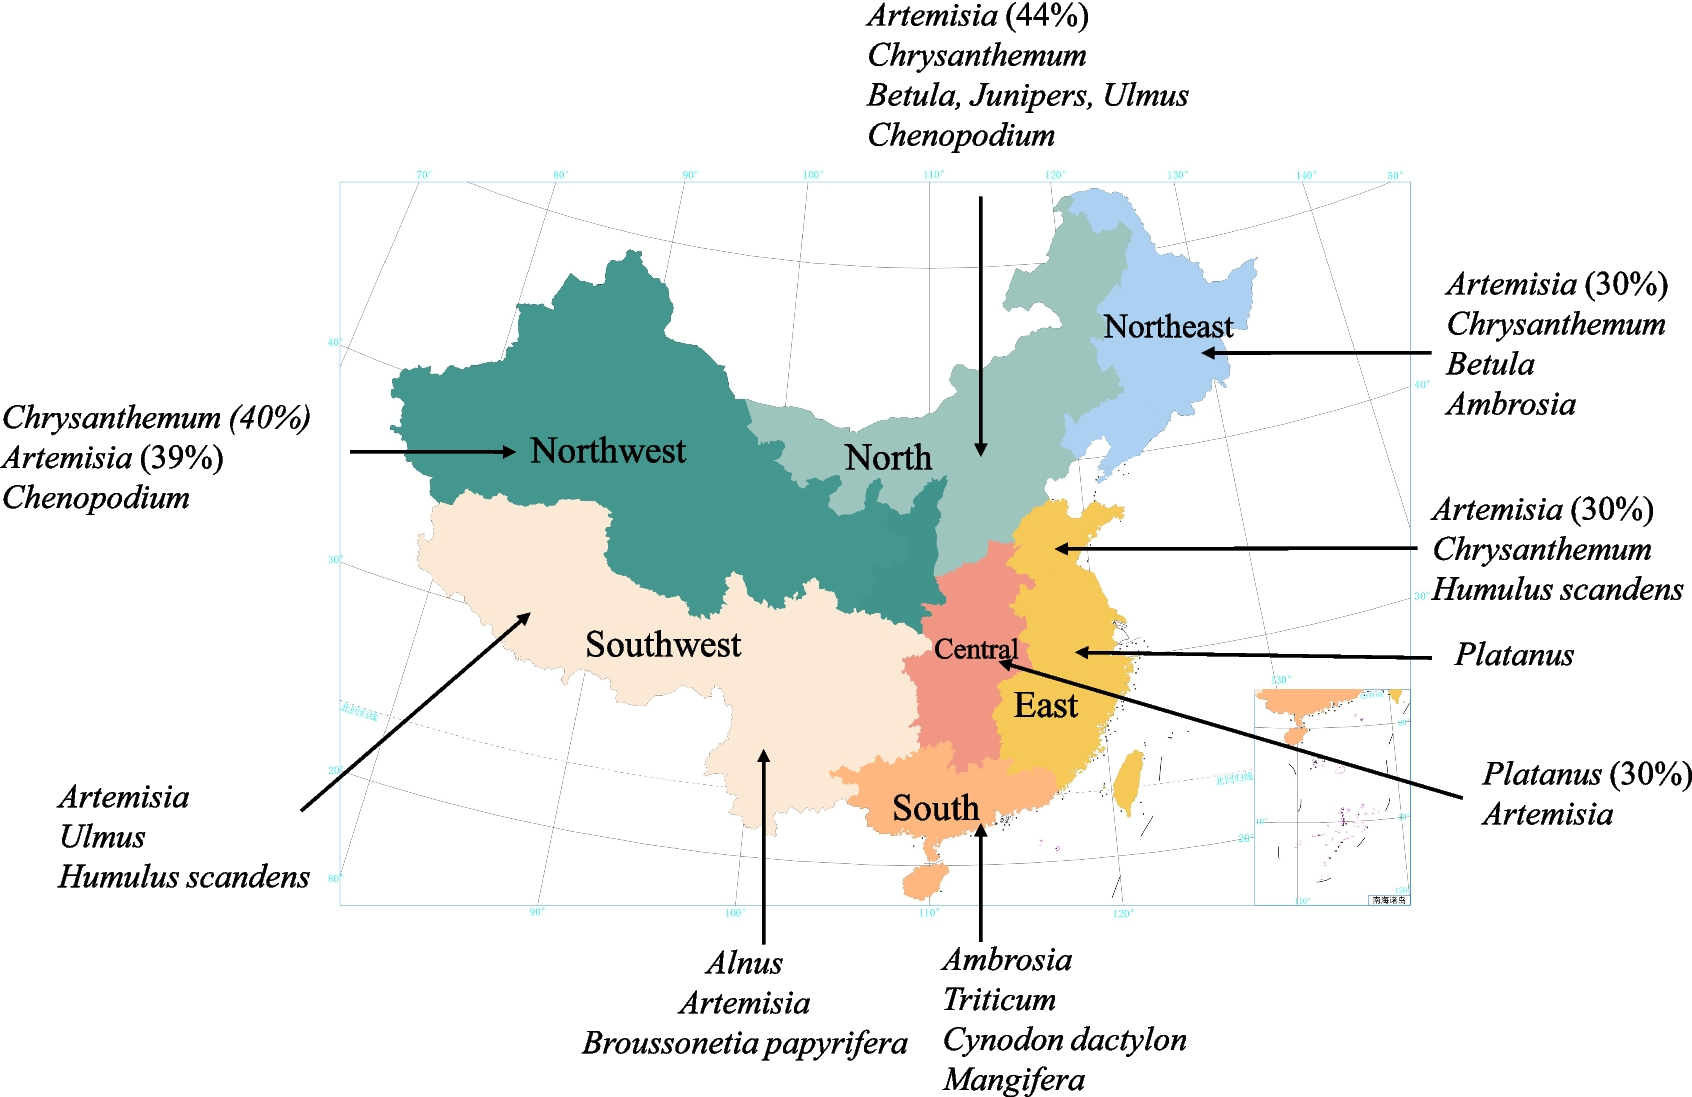 Food-Pollen Cross-Reactivity and its Molecular Diagnosis in China